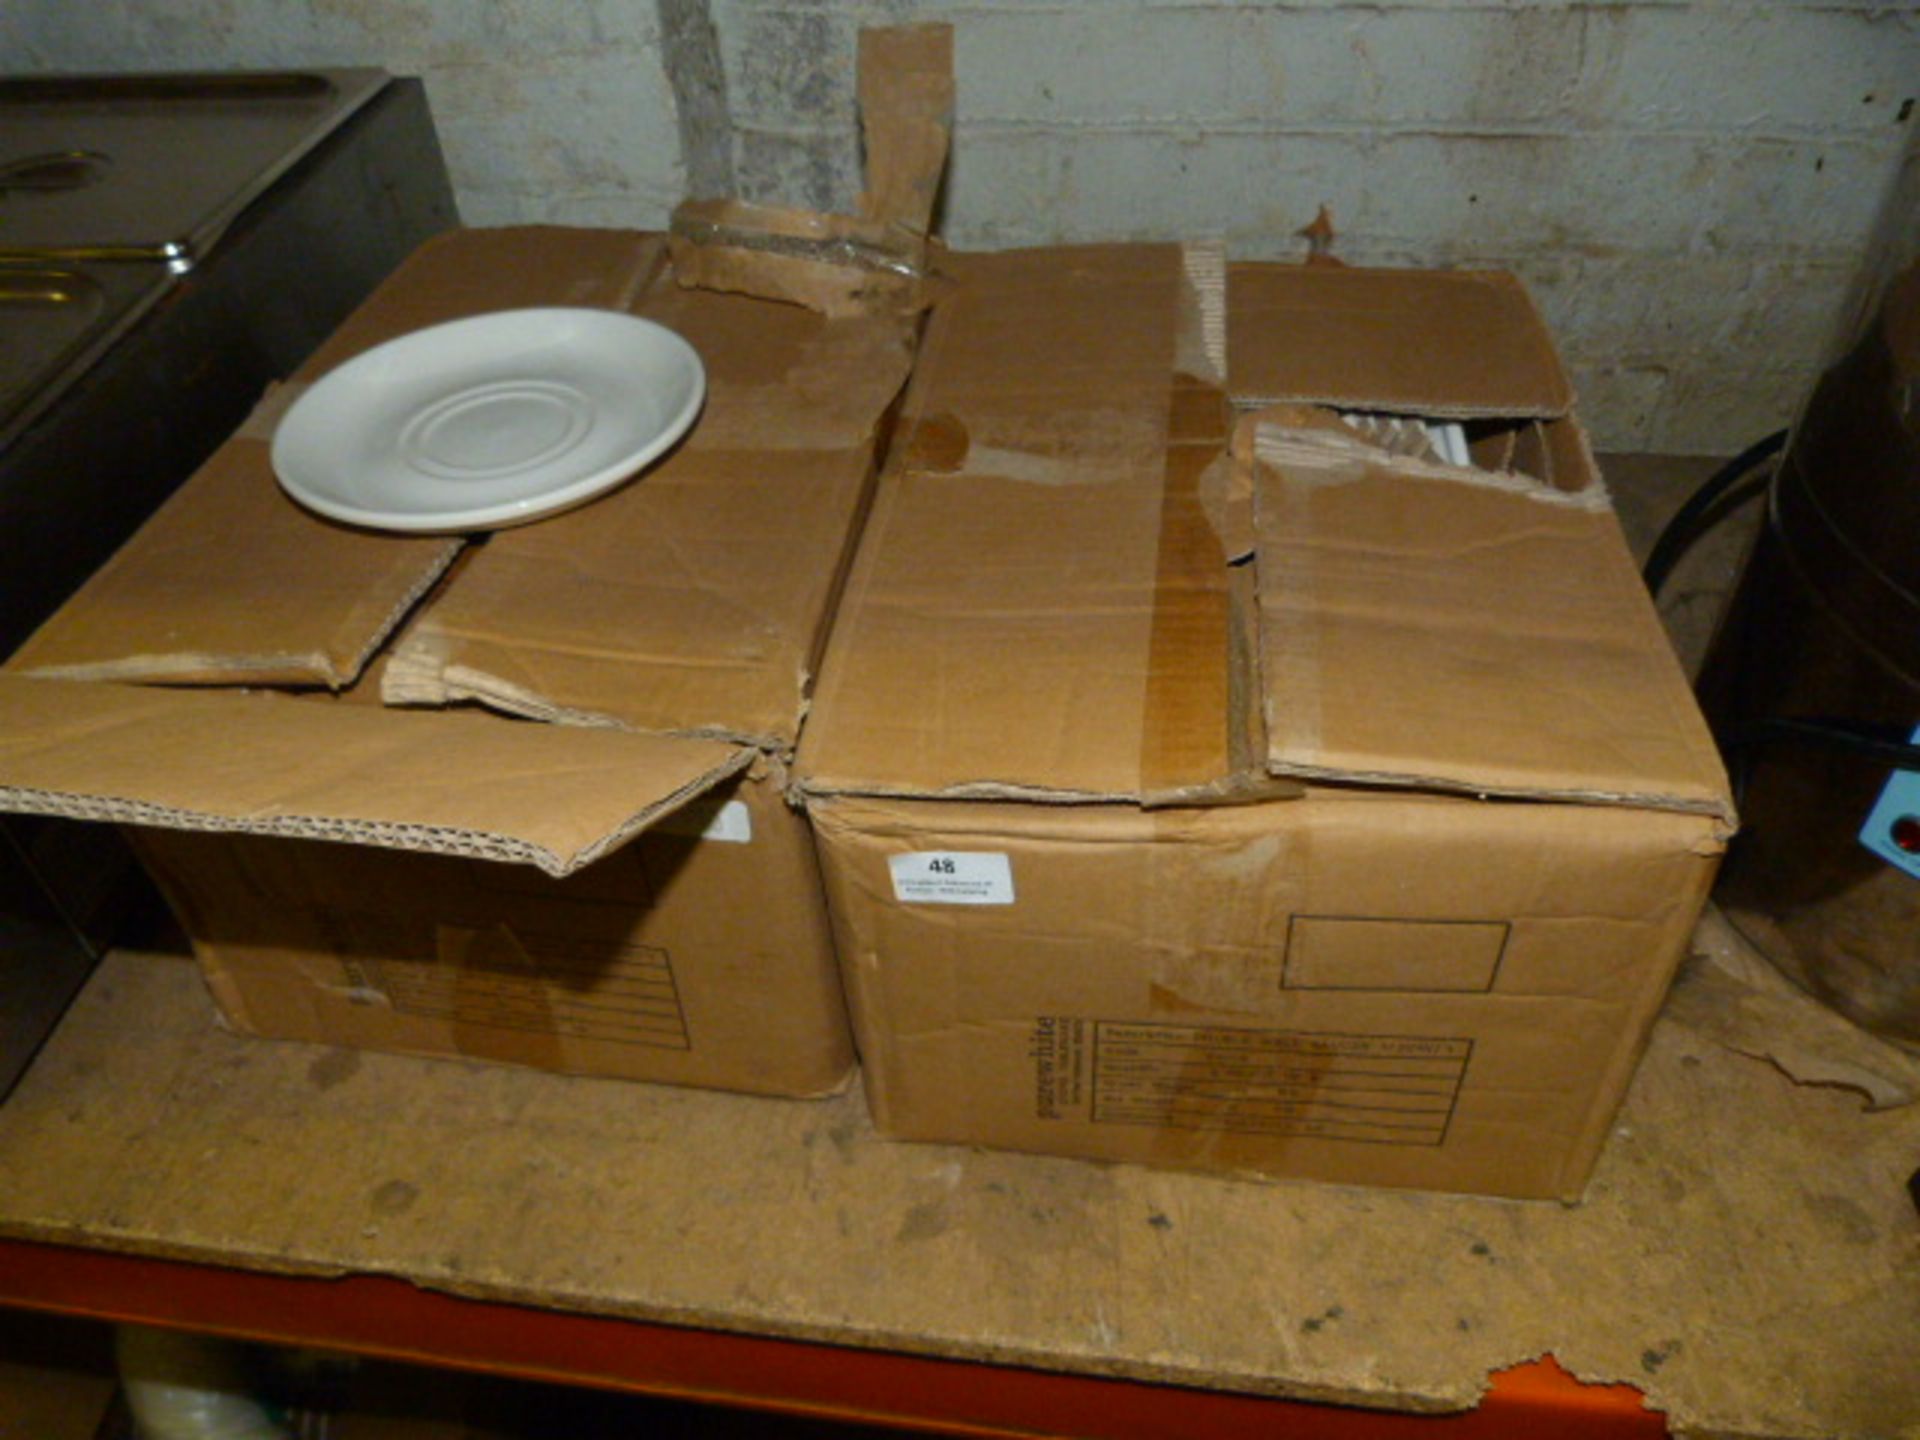 Two Boxes of White Saucers